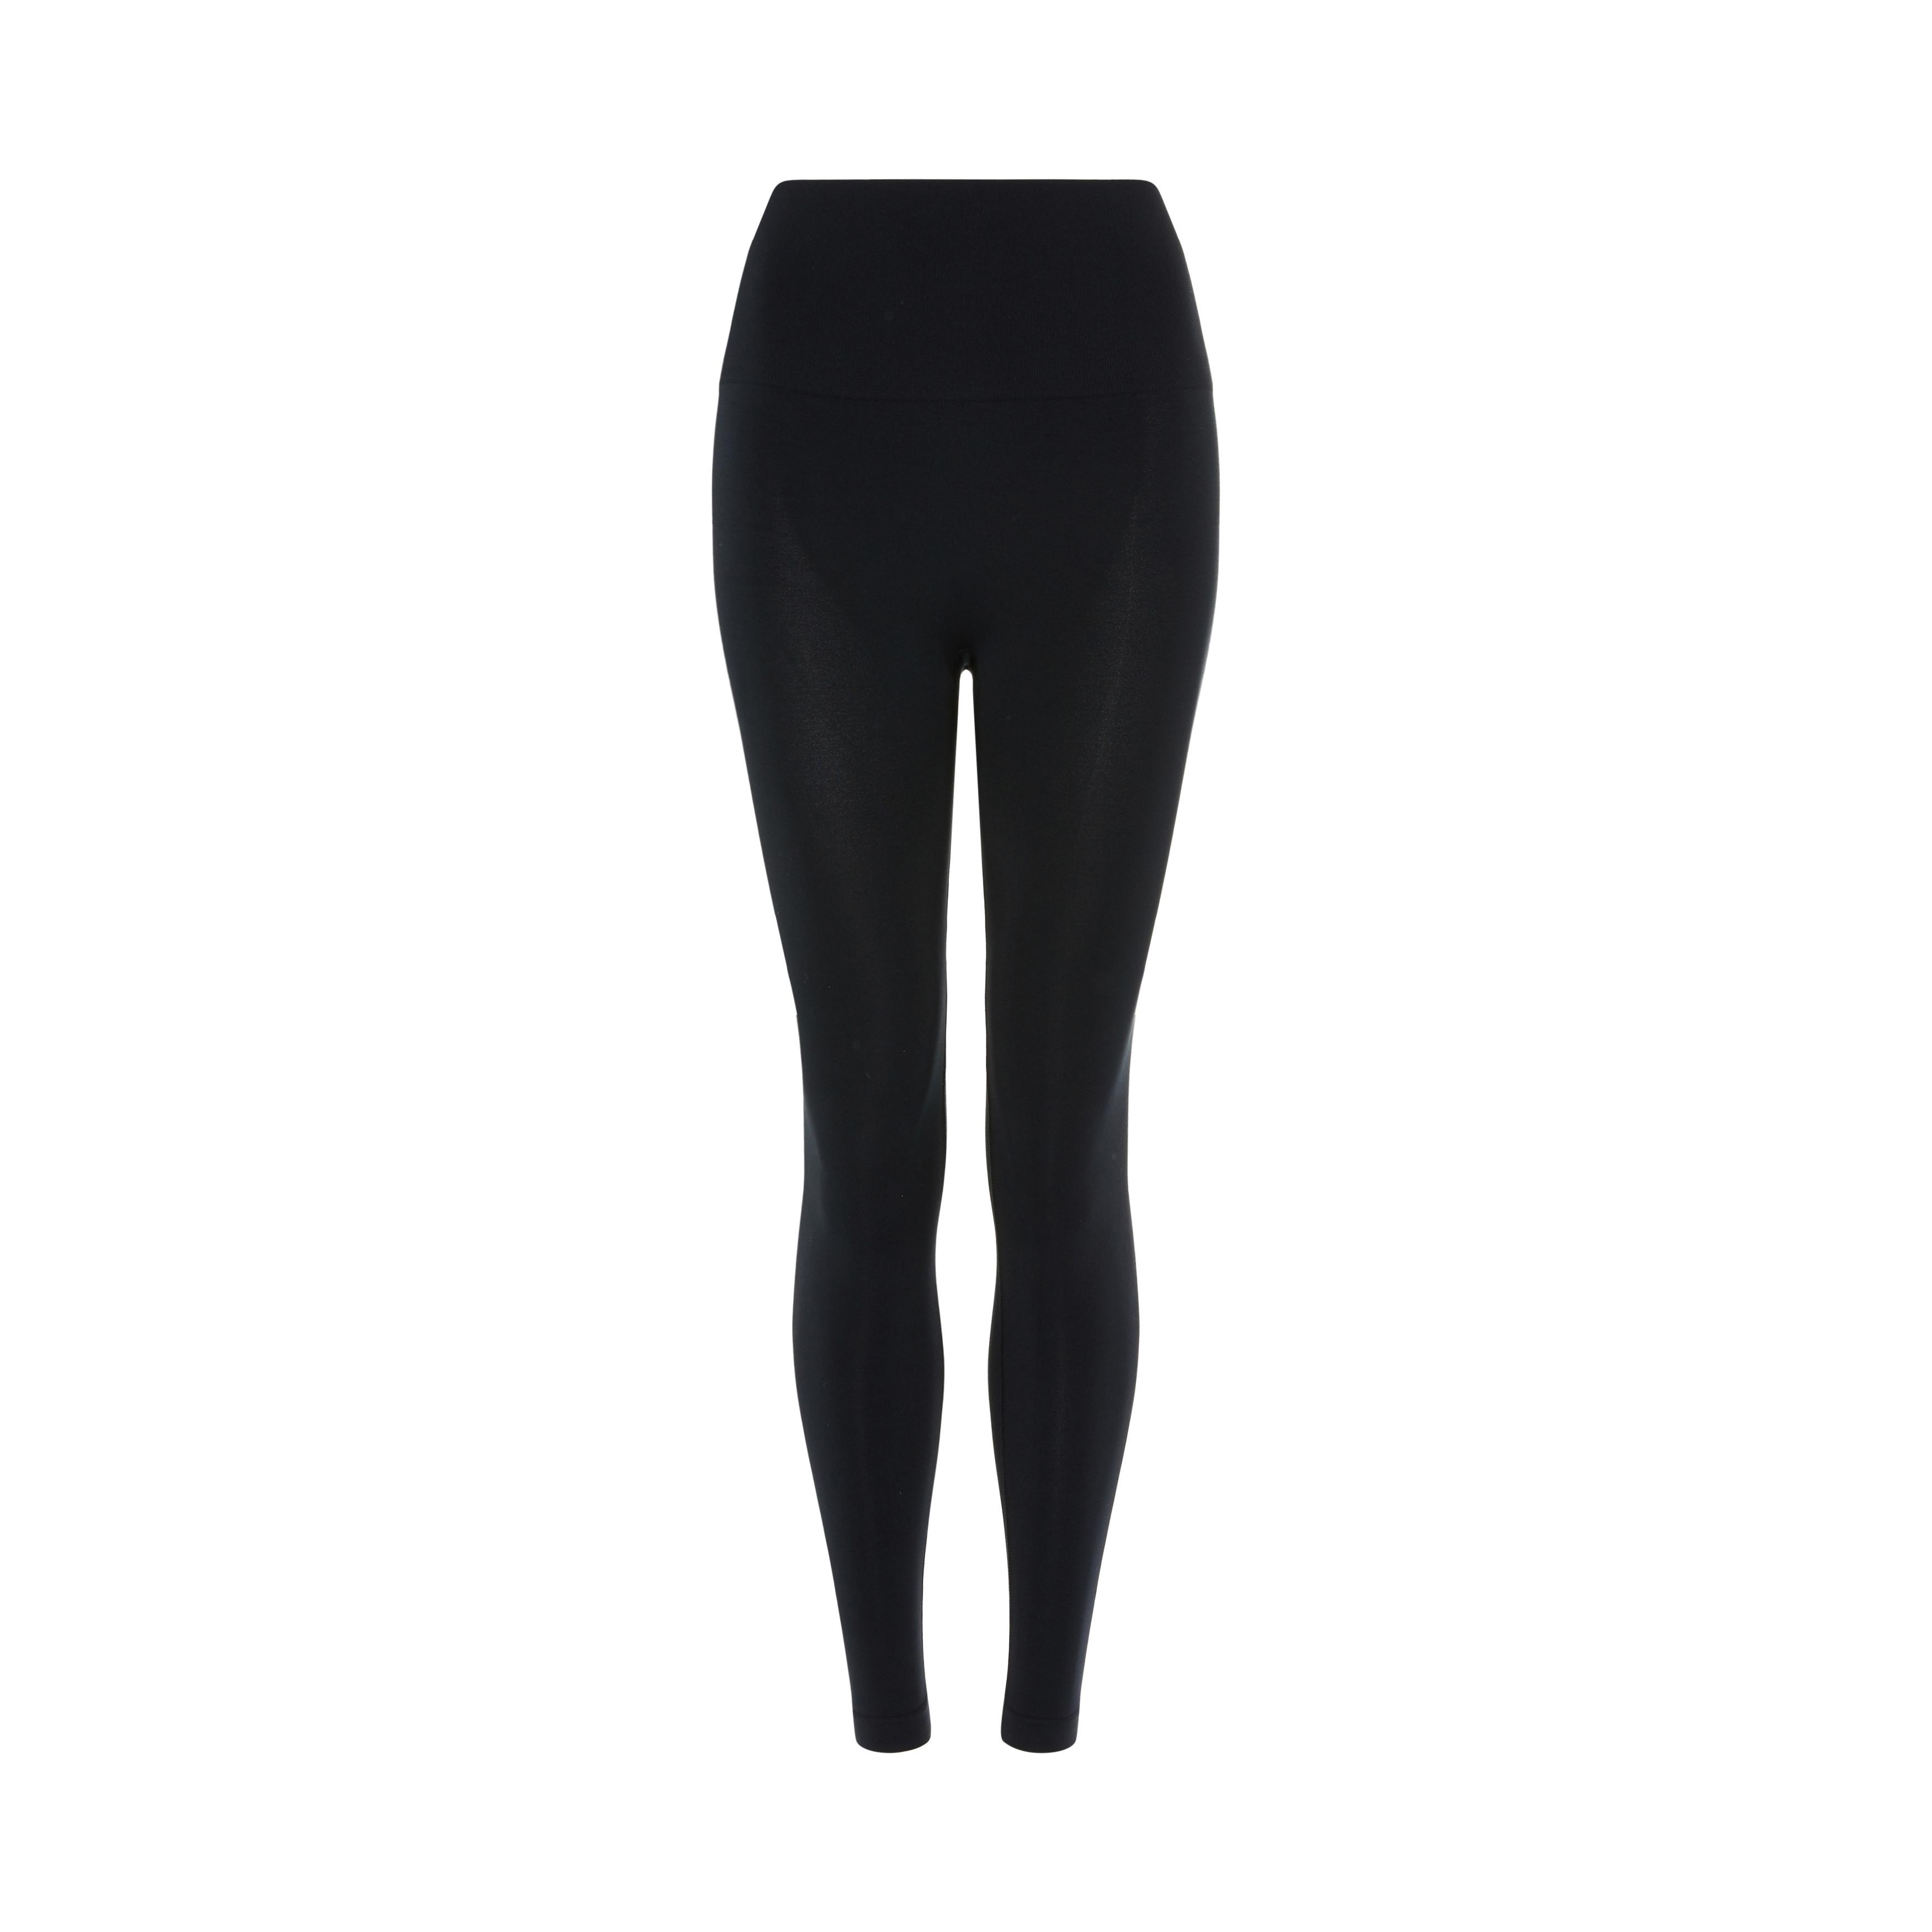 Black Thermolite Footless Tights | Women's Socks & Tights | Women's Style | Our Womenswear 